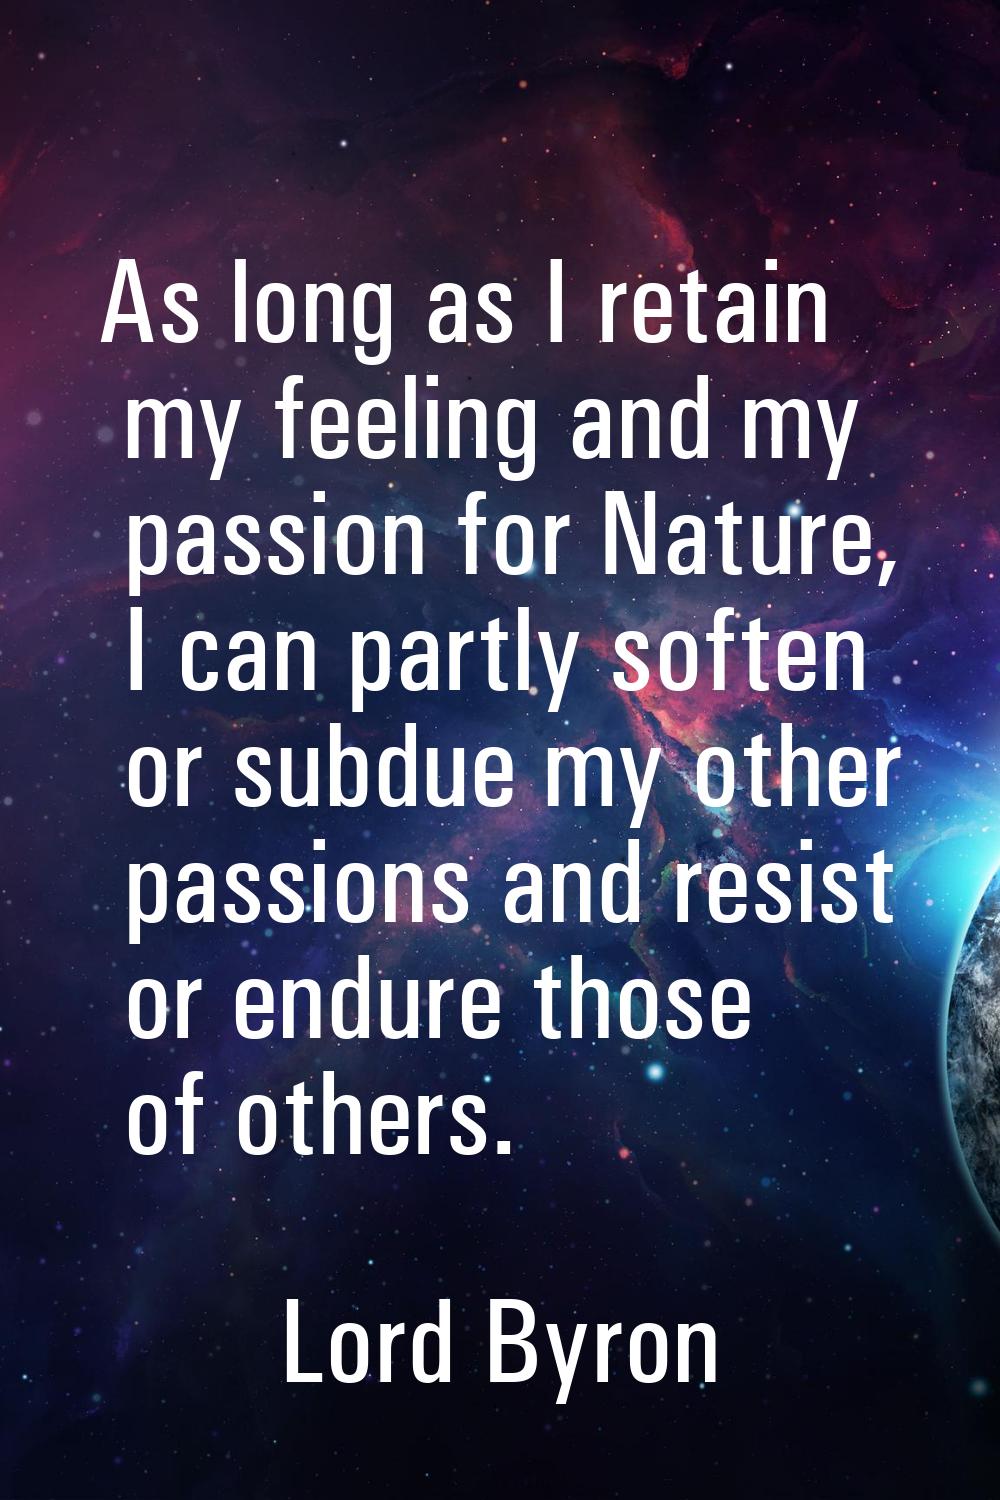 As long as I retain my feeling and my passion for Nature, I can partly soften or subdue my other pa